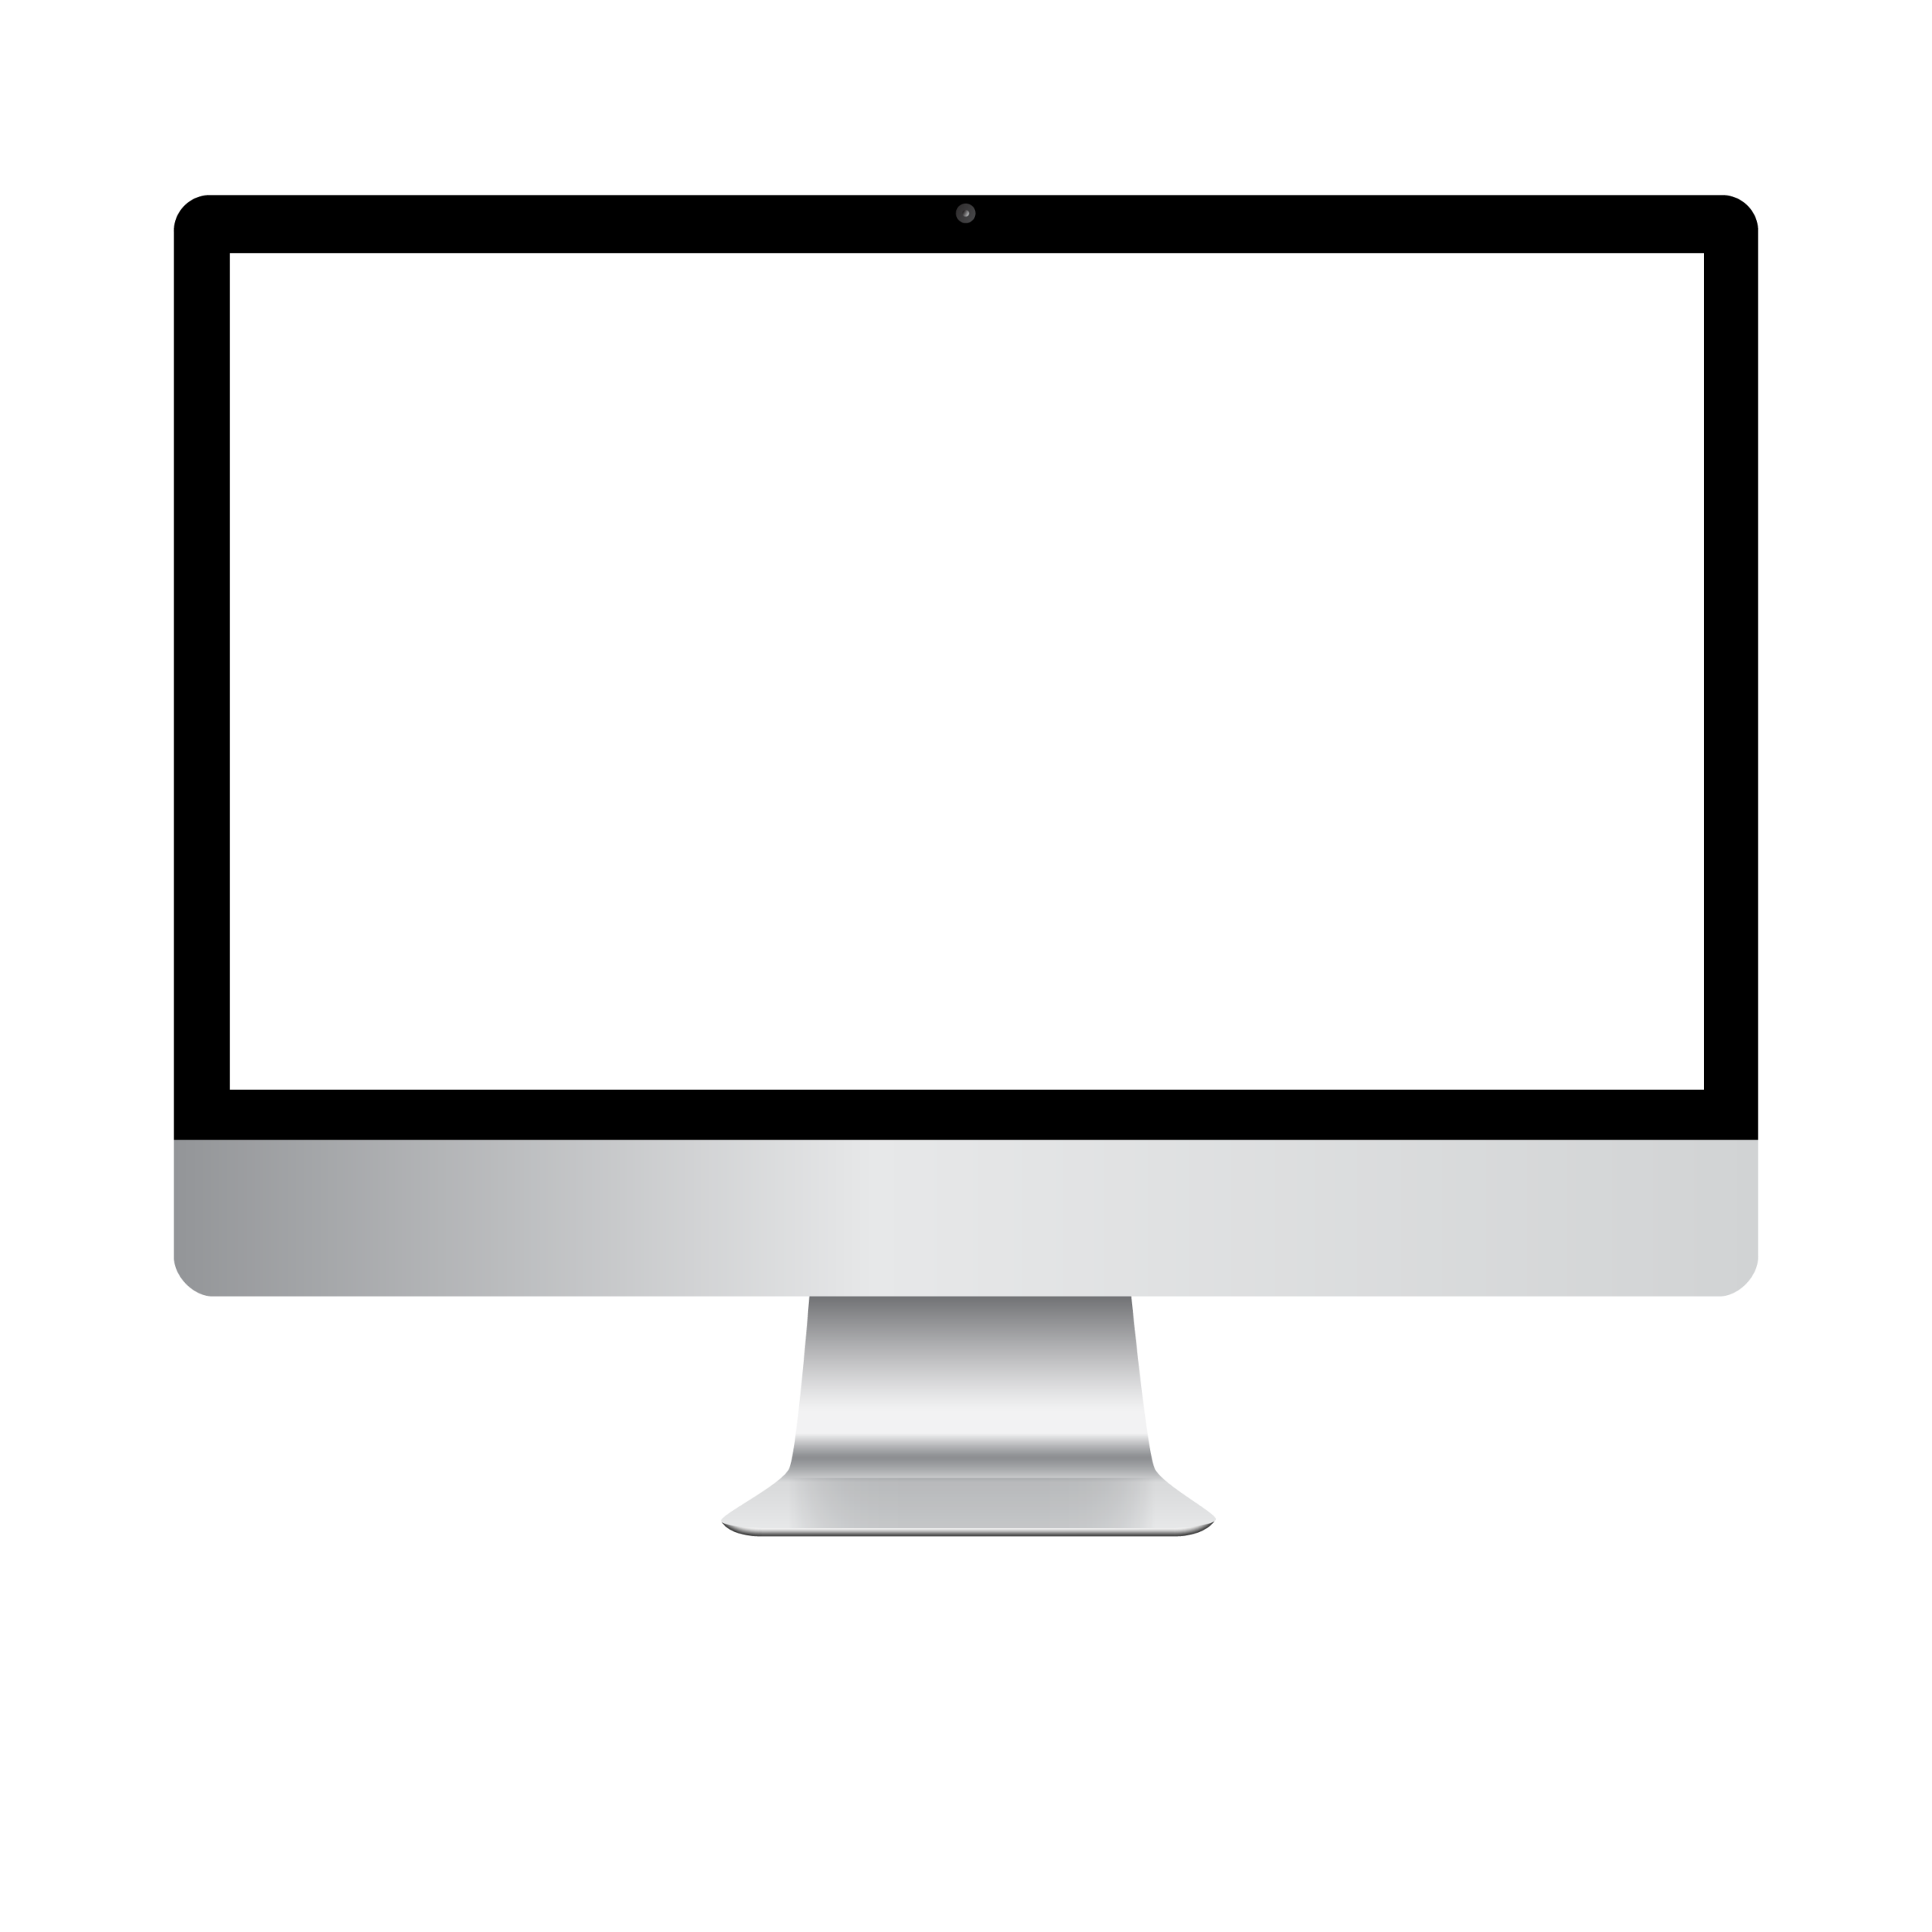 Imac Frame - Apple iMac Style - Picture Frame Part 2 (BKMBLXNSY) by